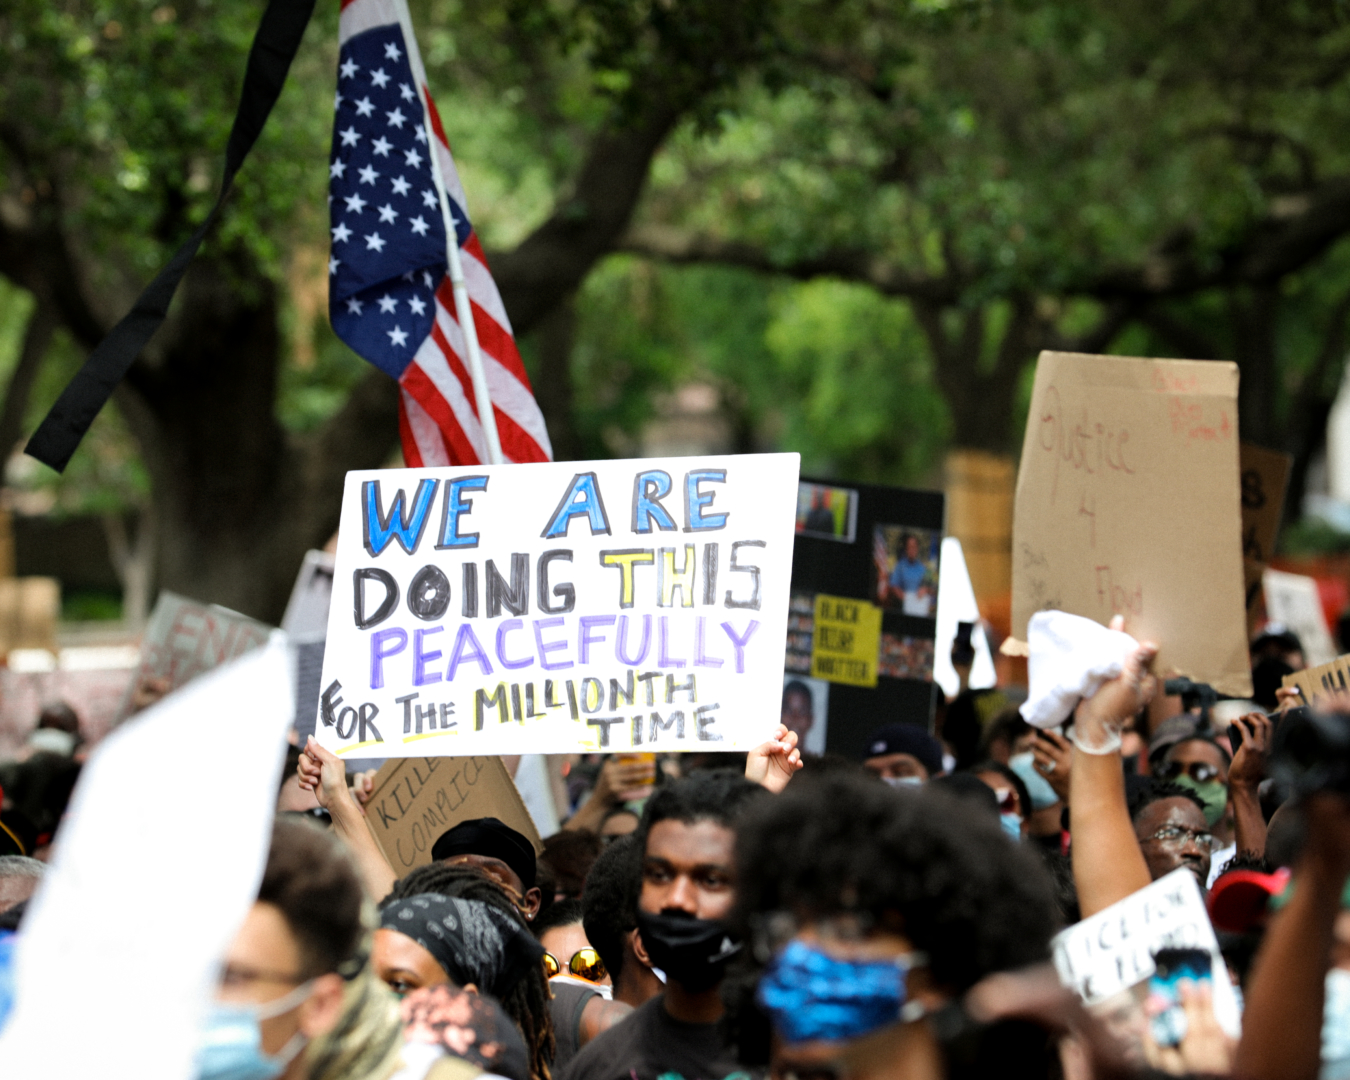 For over a week, thousands of demonstrators have gathered in Houston to protest against racial injustice after the death of George Floyd. | Mikol Kindle Jr./The Cougar